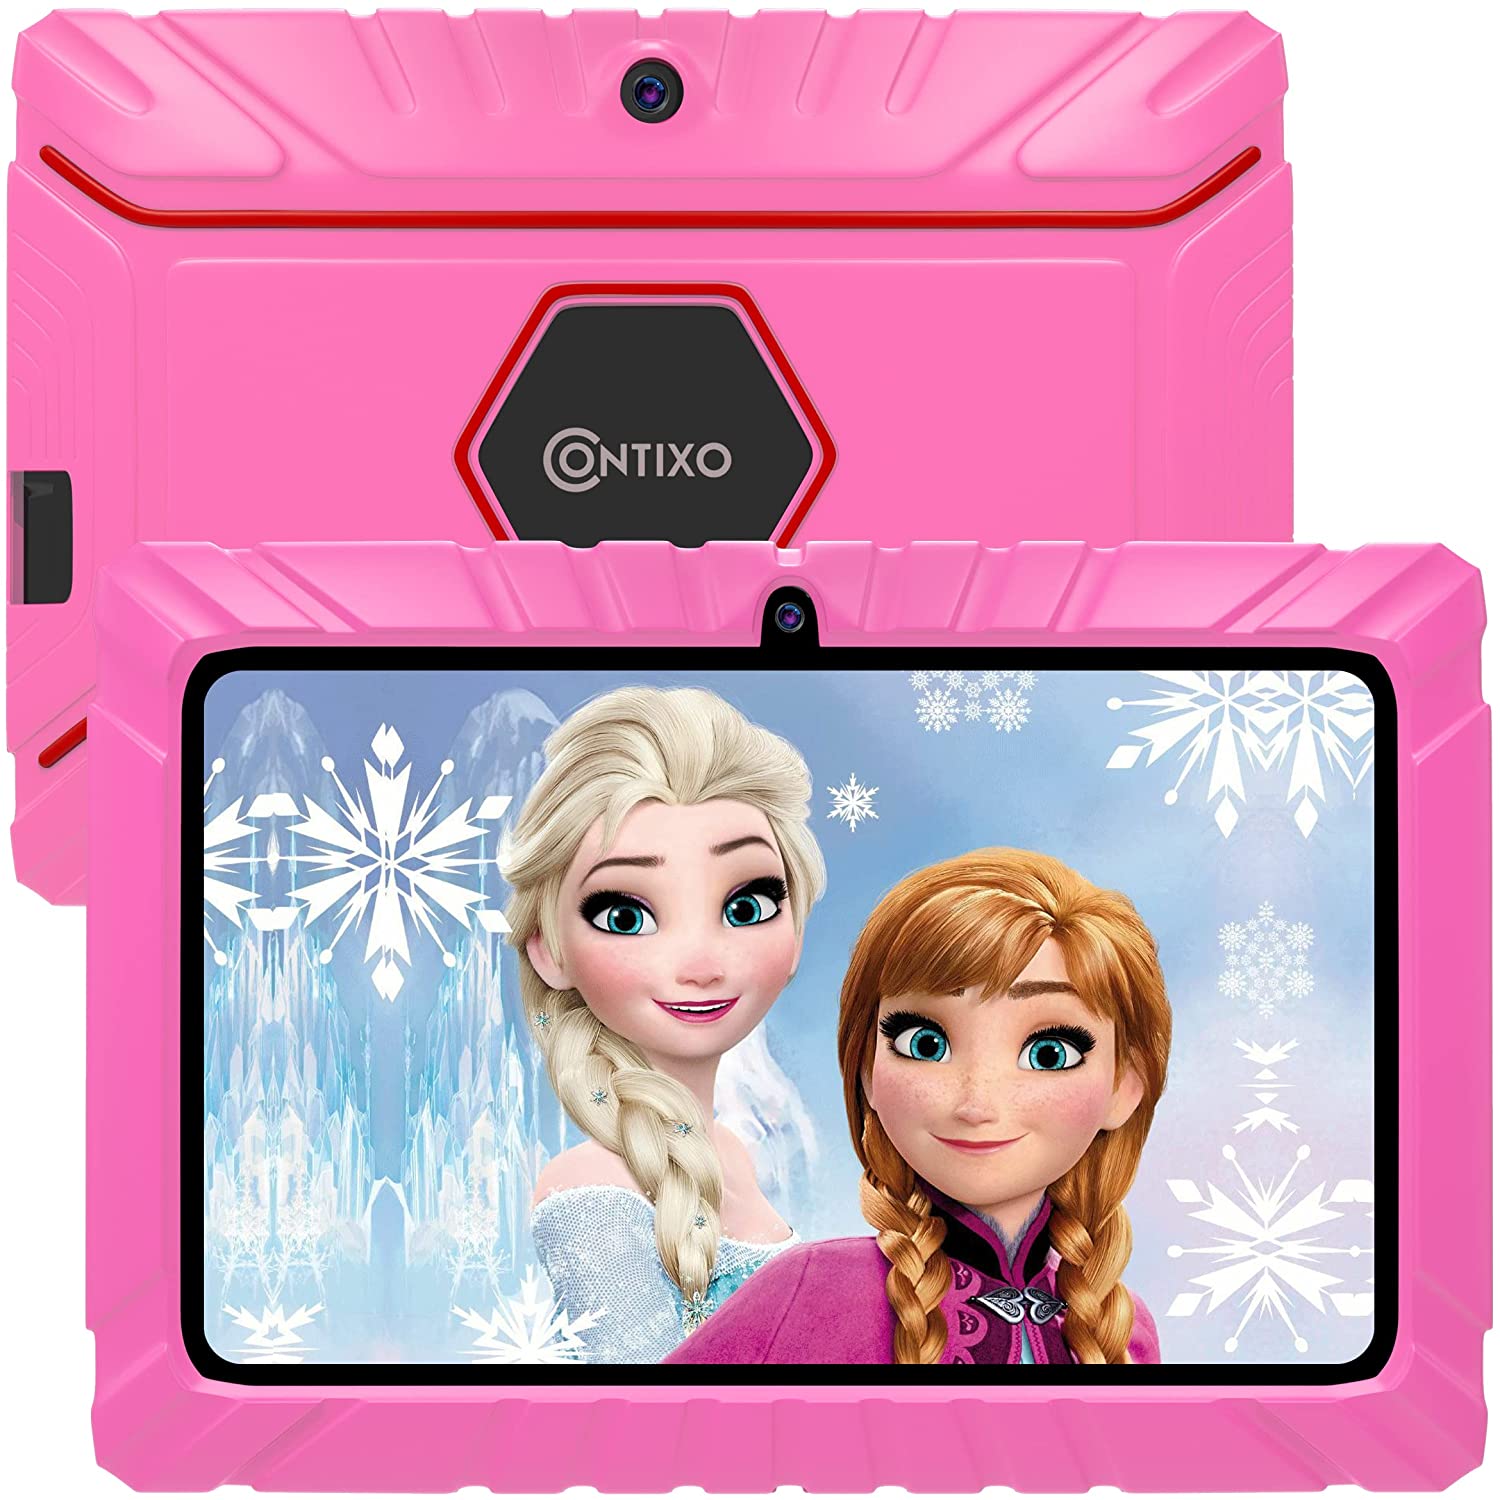 Contixo Kids Tablet V8, 7-inch HD, Ages 3-7, Toddler Tablet with Camera, Parental Control - Android 11, 16GB, WiFi, Lear